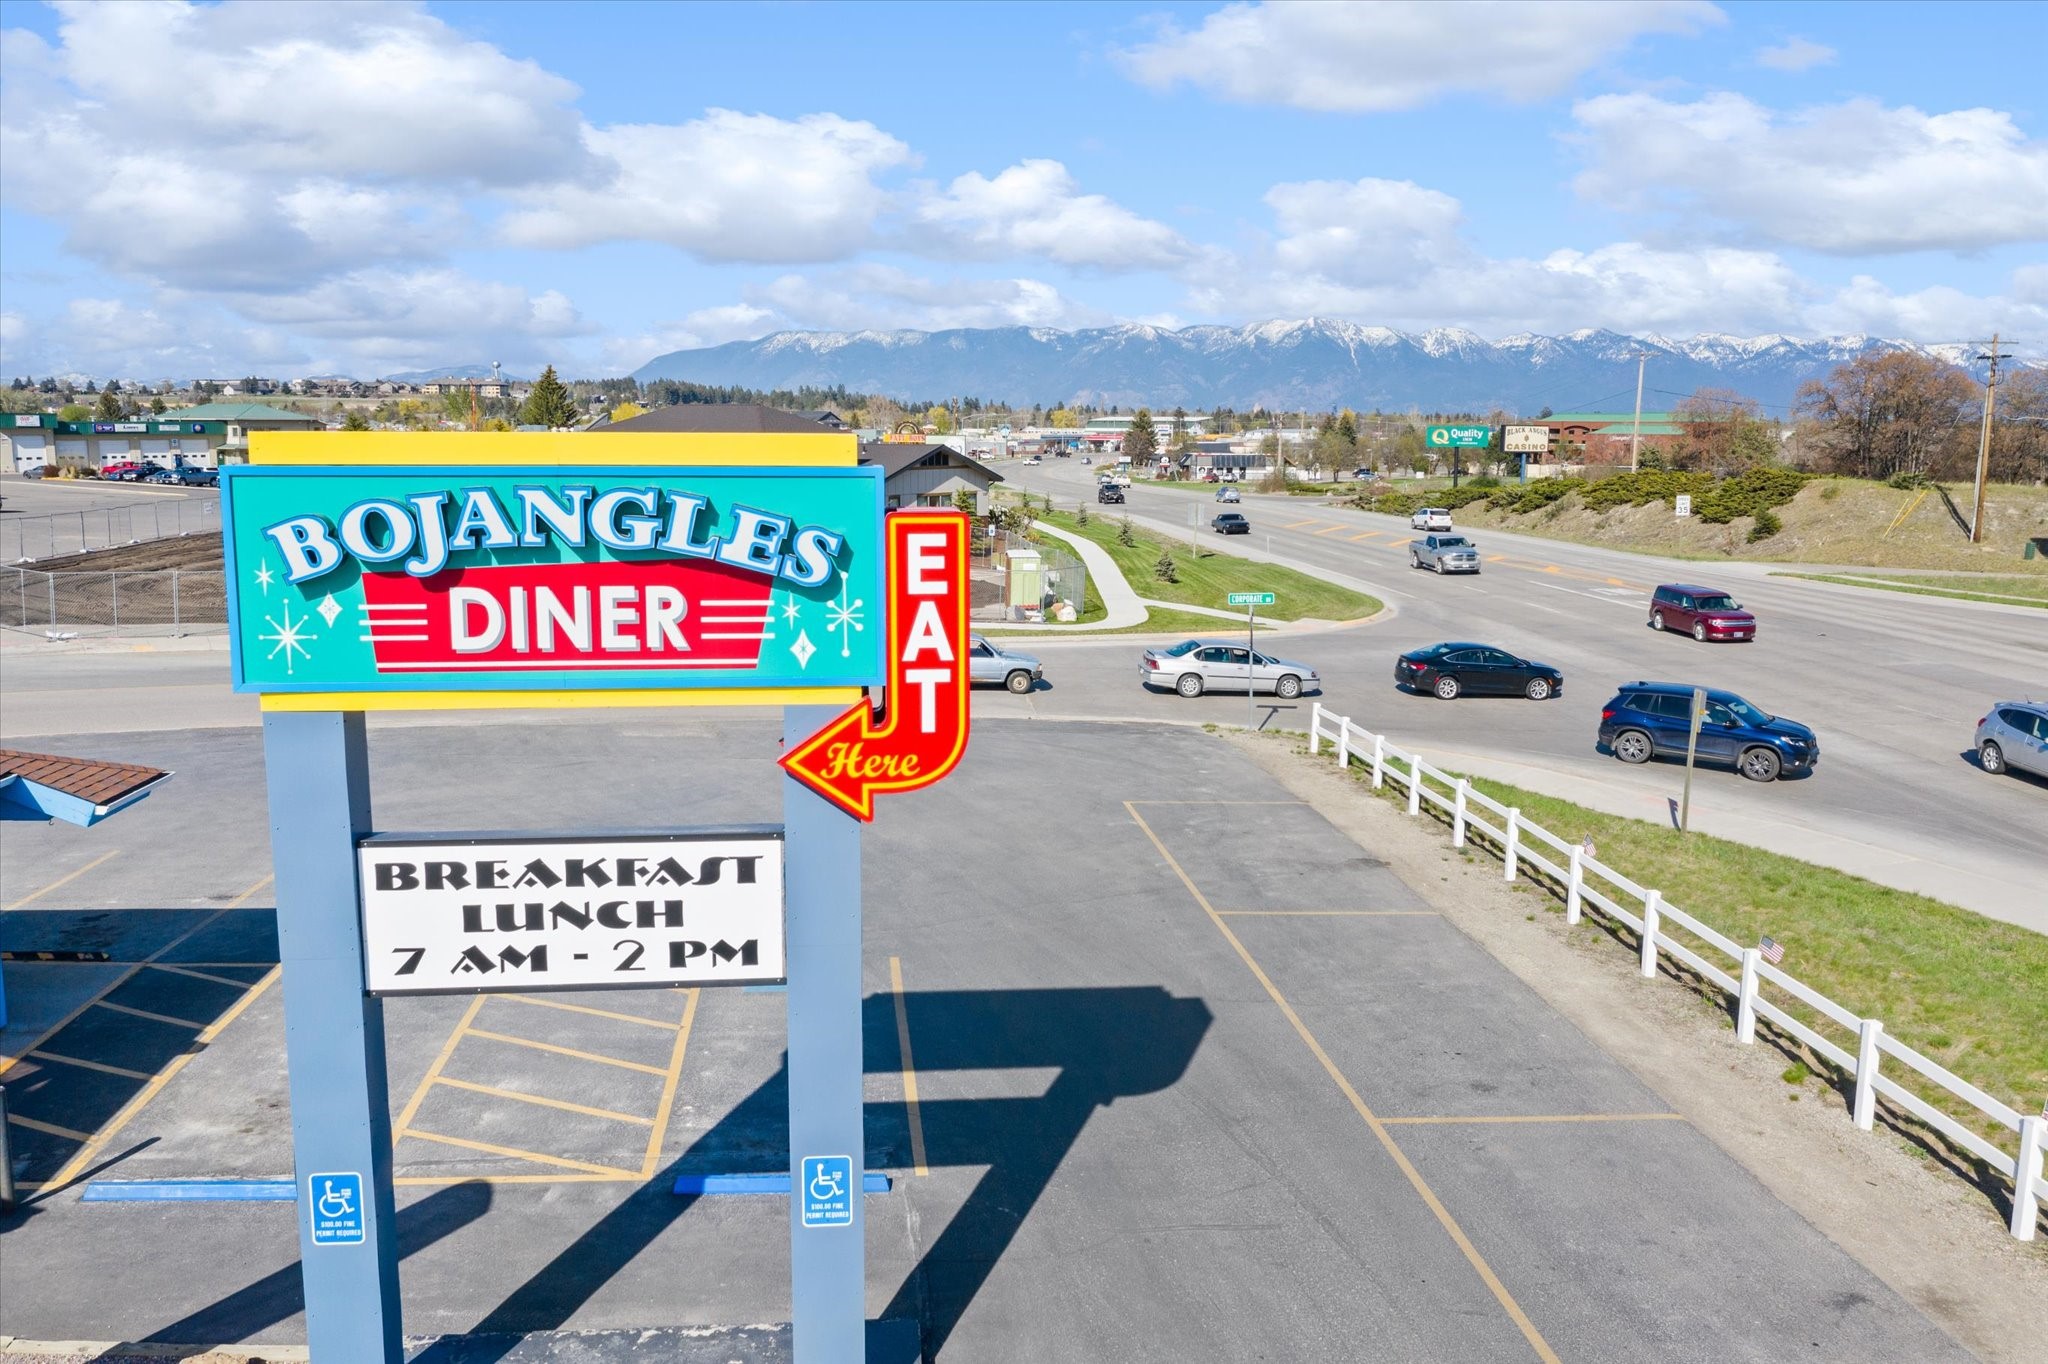 PRIME LOCATION~ Bojangles Diner for sale.  Offering includes .96 acre of commercial real estate, water right to commercial 20 gpm/private water well, 2548 square foot restaurant with everything included & business.  Contact Rena Saunier (406)871-7575 or your real estate professional.